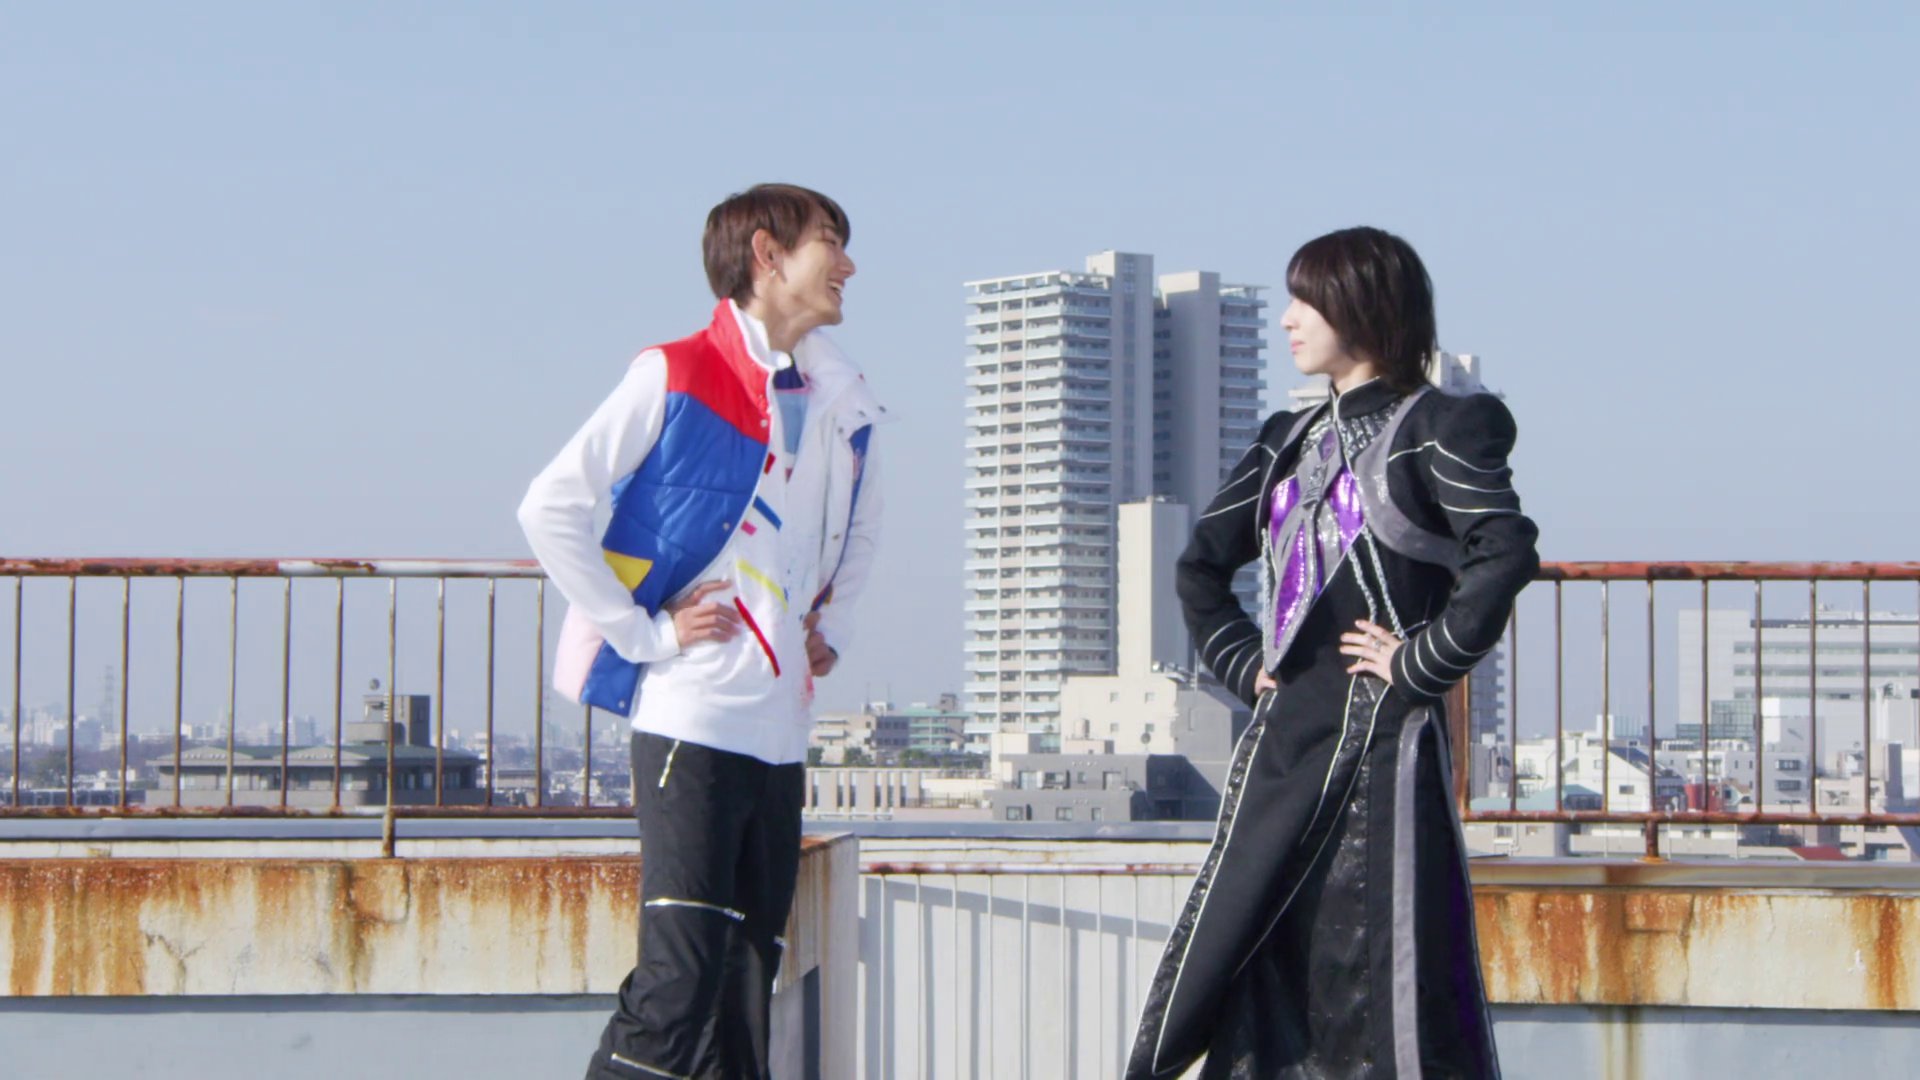 Kaito and Stacey smiling on a rooftop.